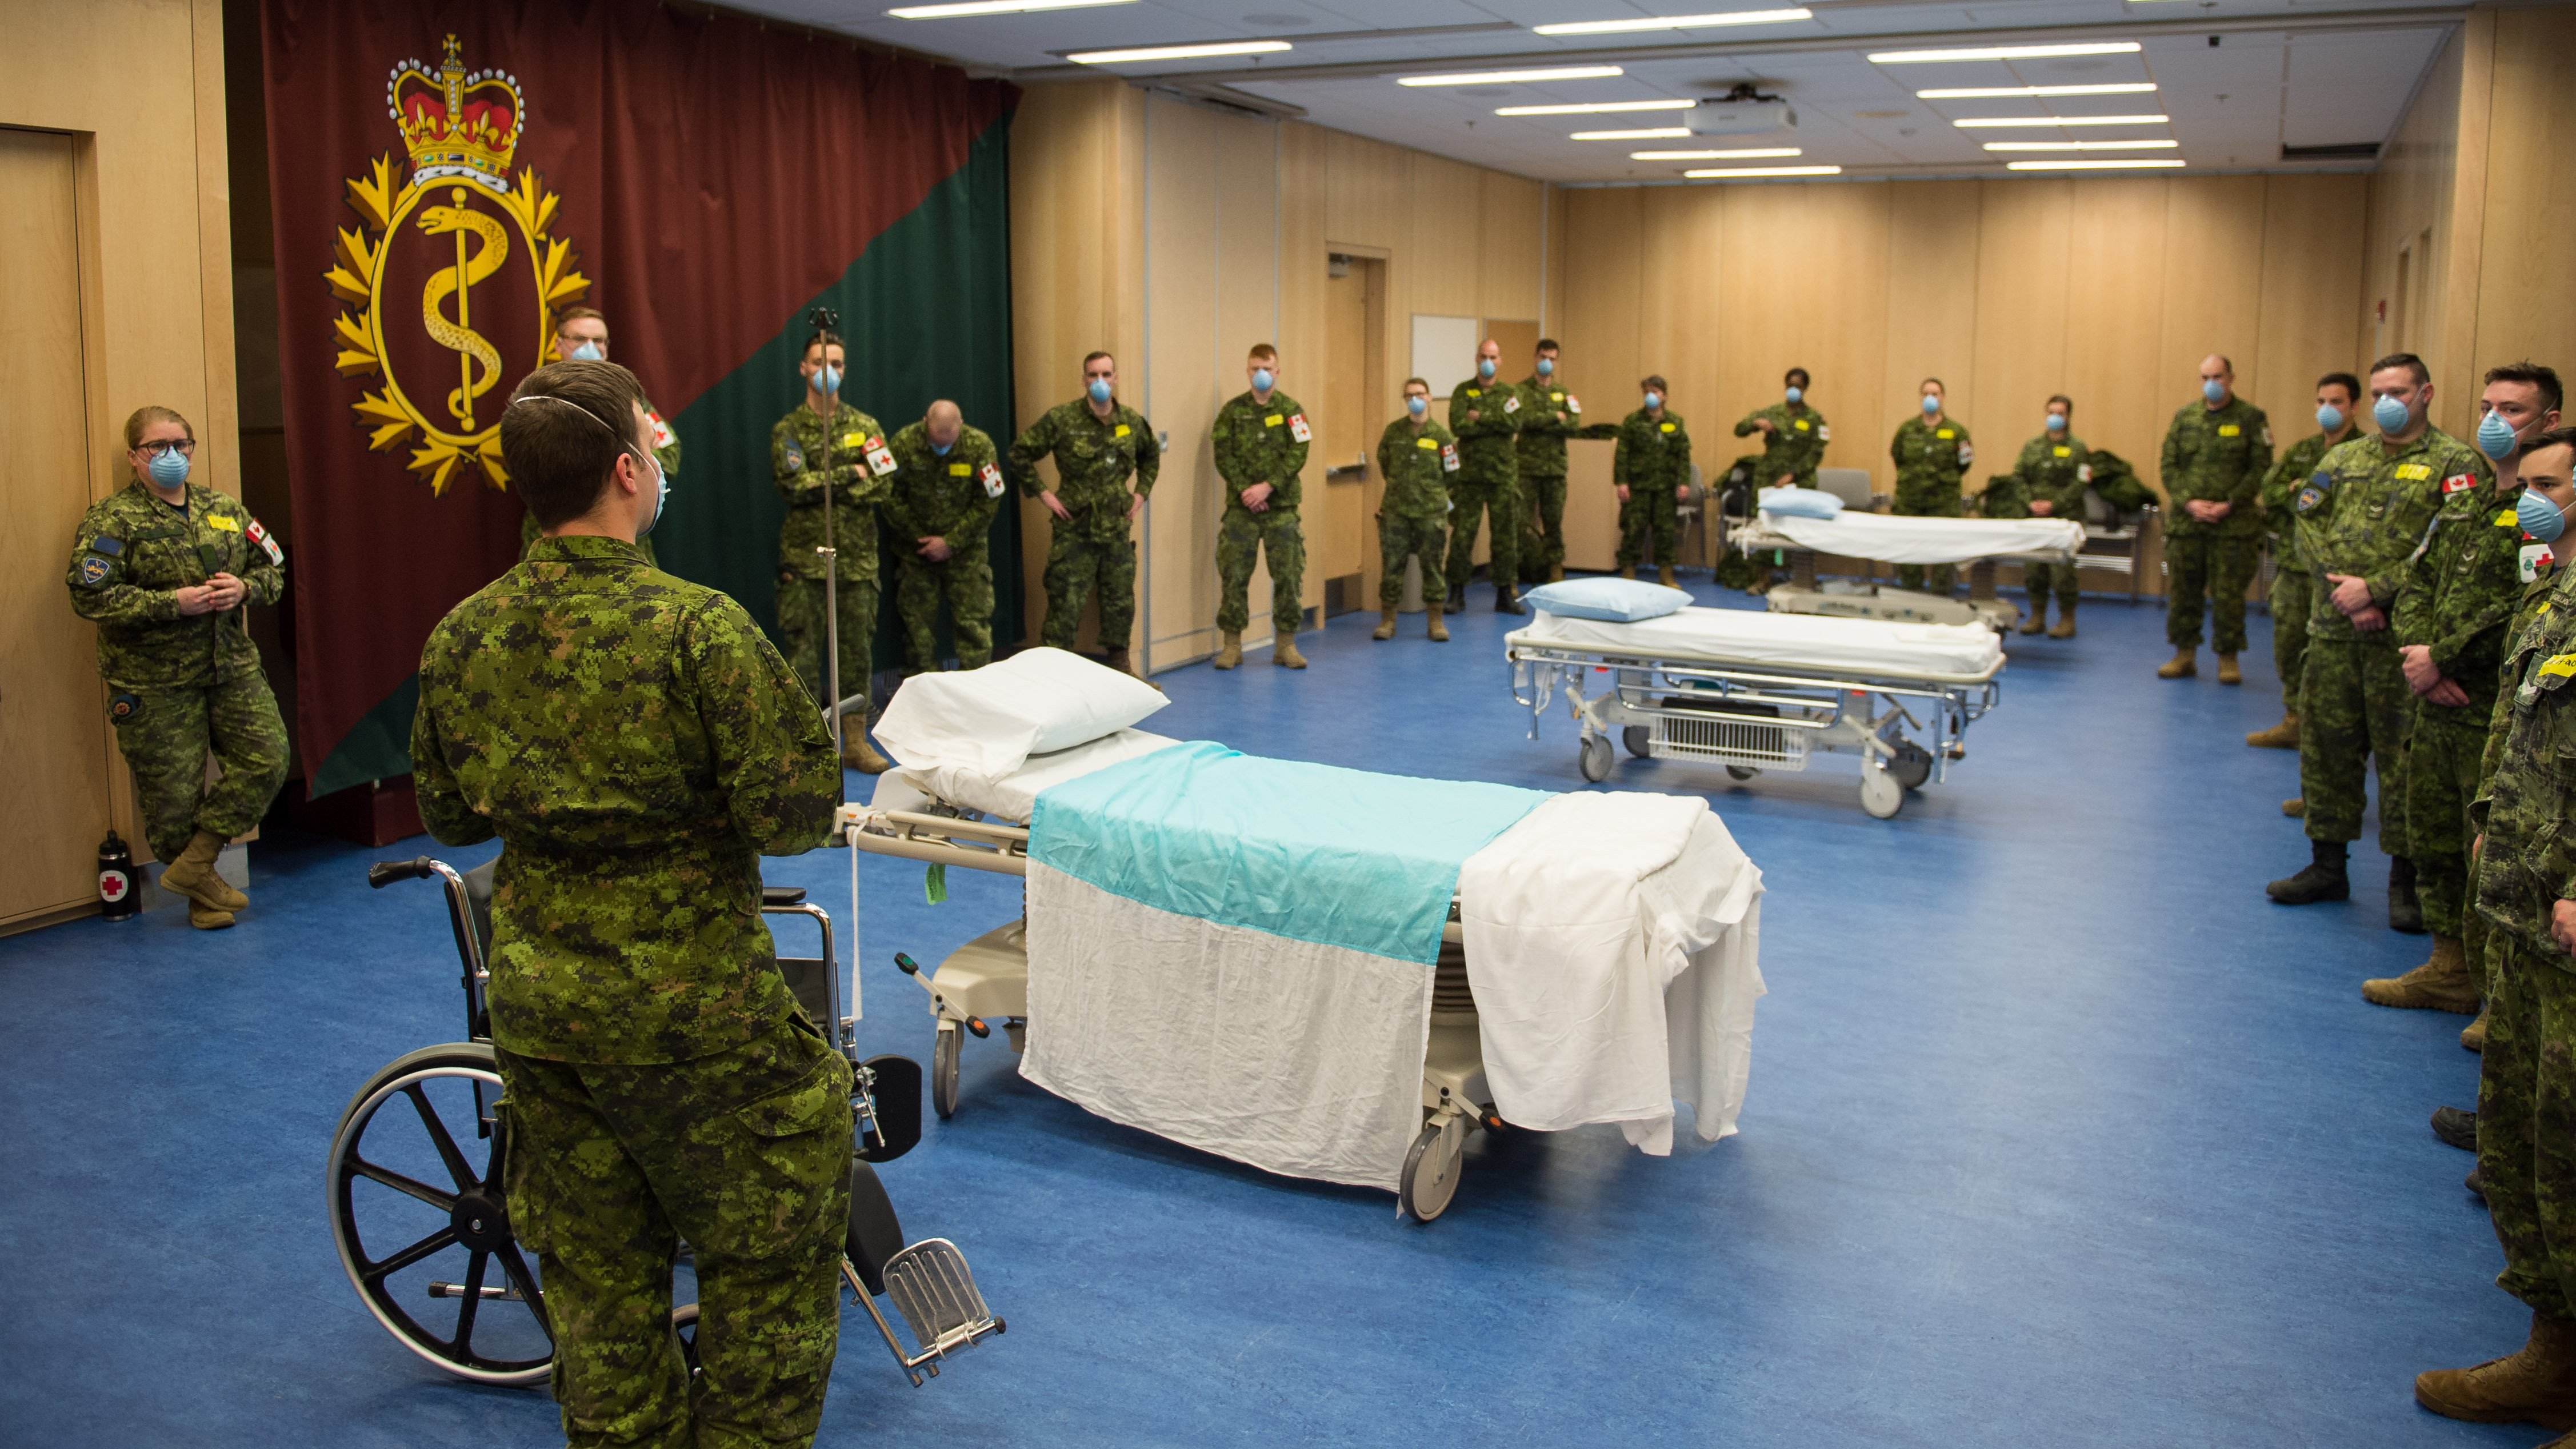 A member of the 4 Health Services Group (4 H Svcs Gp), performs a triage in order to enter the Saint-Jean garrison clinic for training during Operation LASER.